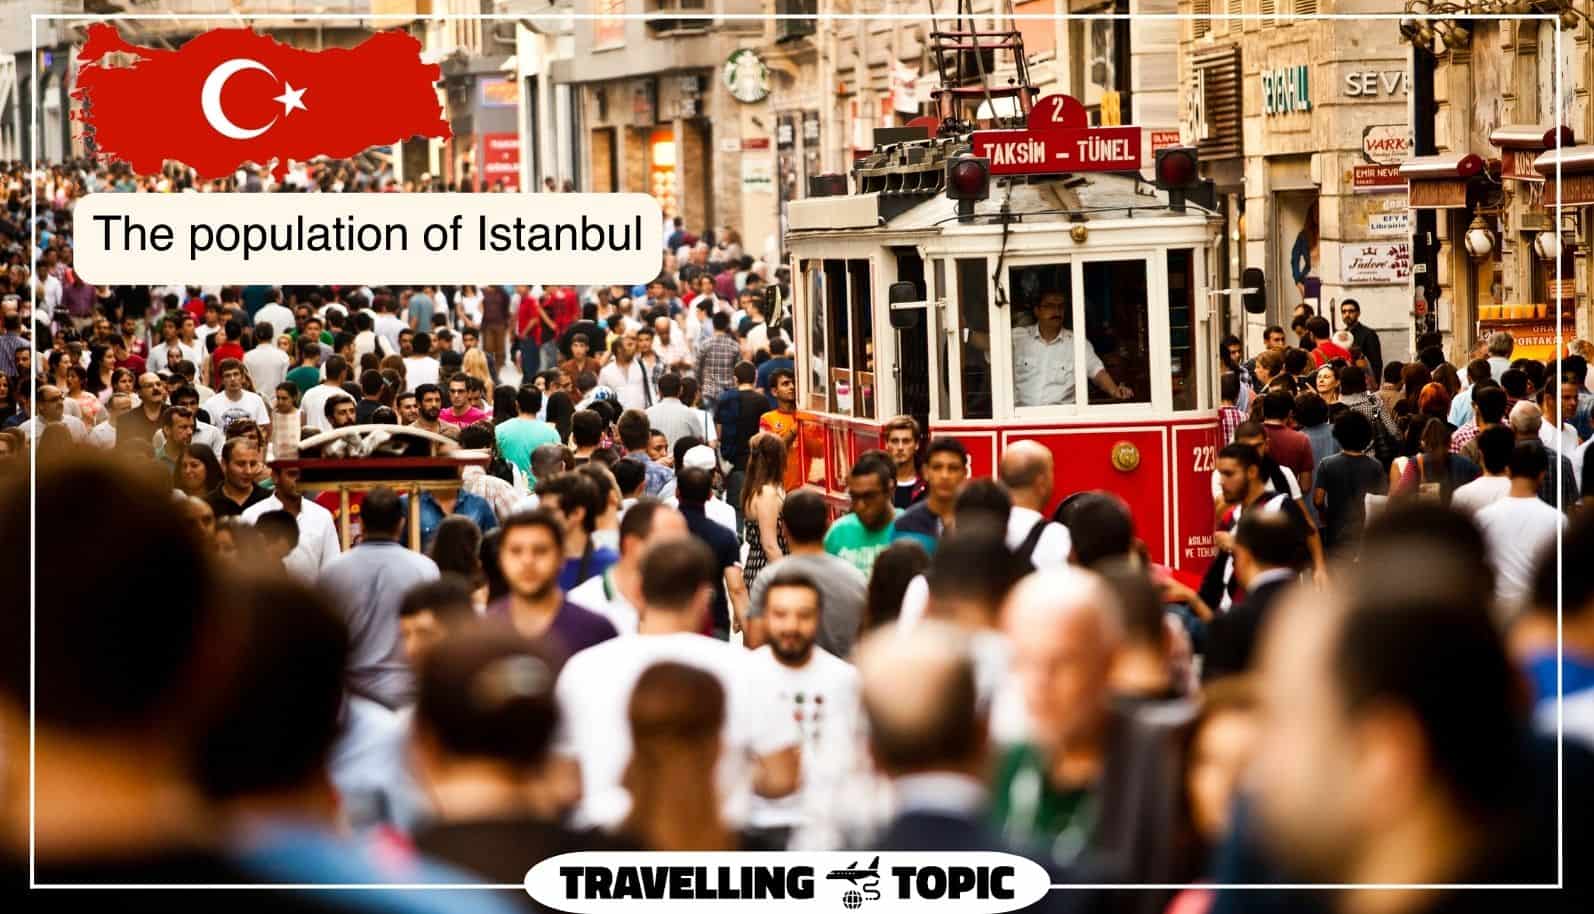 The population of Istanbul